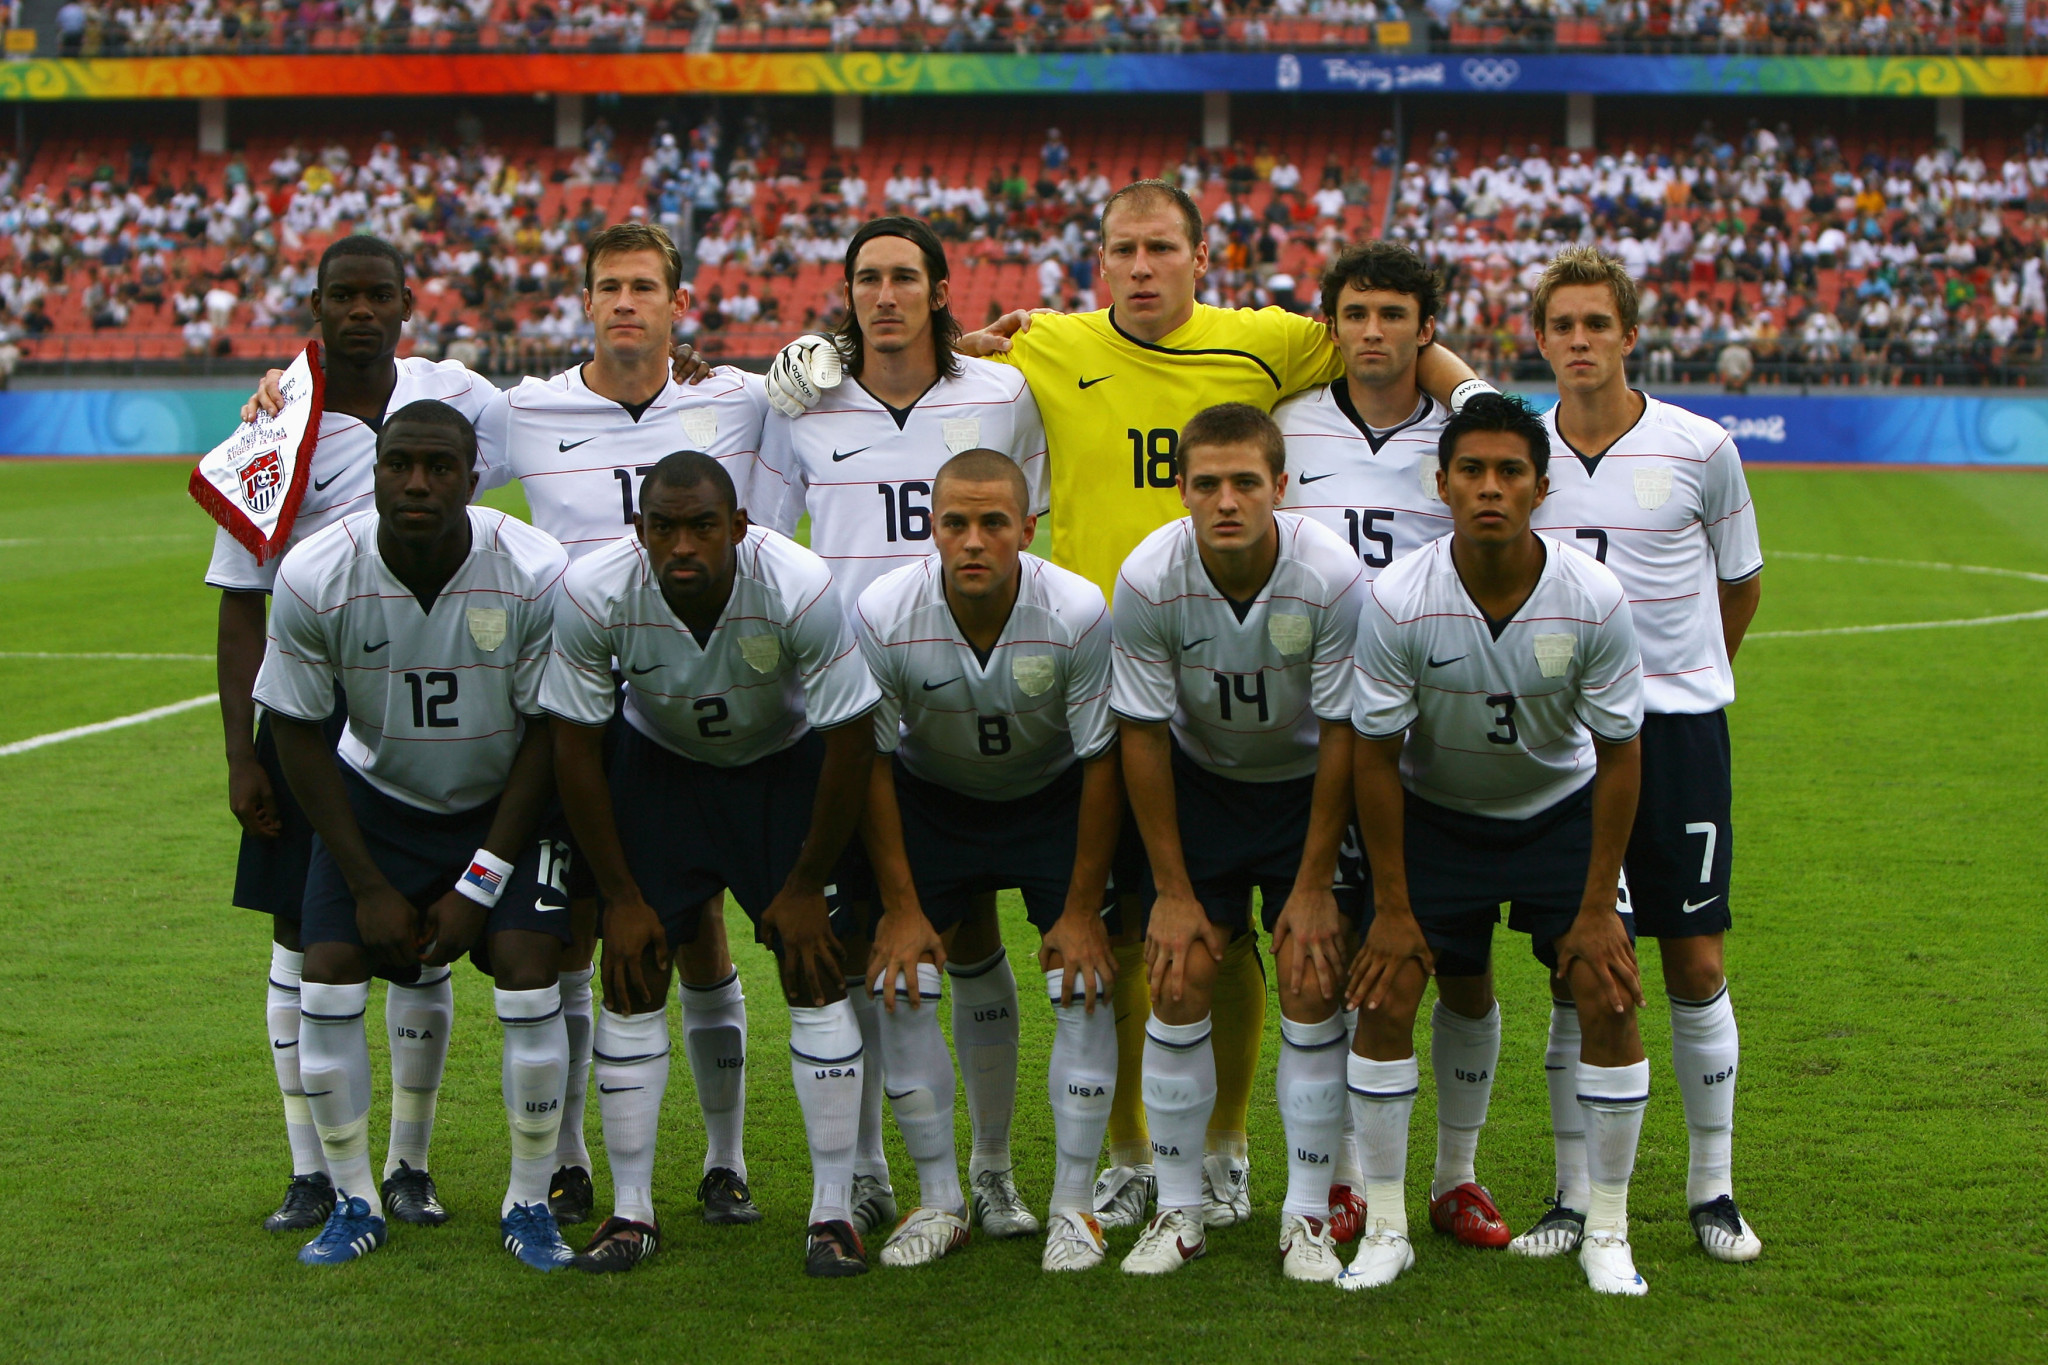 The United States last appeared in the men's football Olympic tournament at Beijing 2008 ©Getty Images